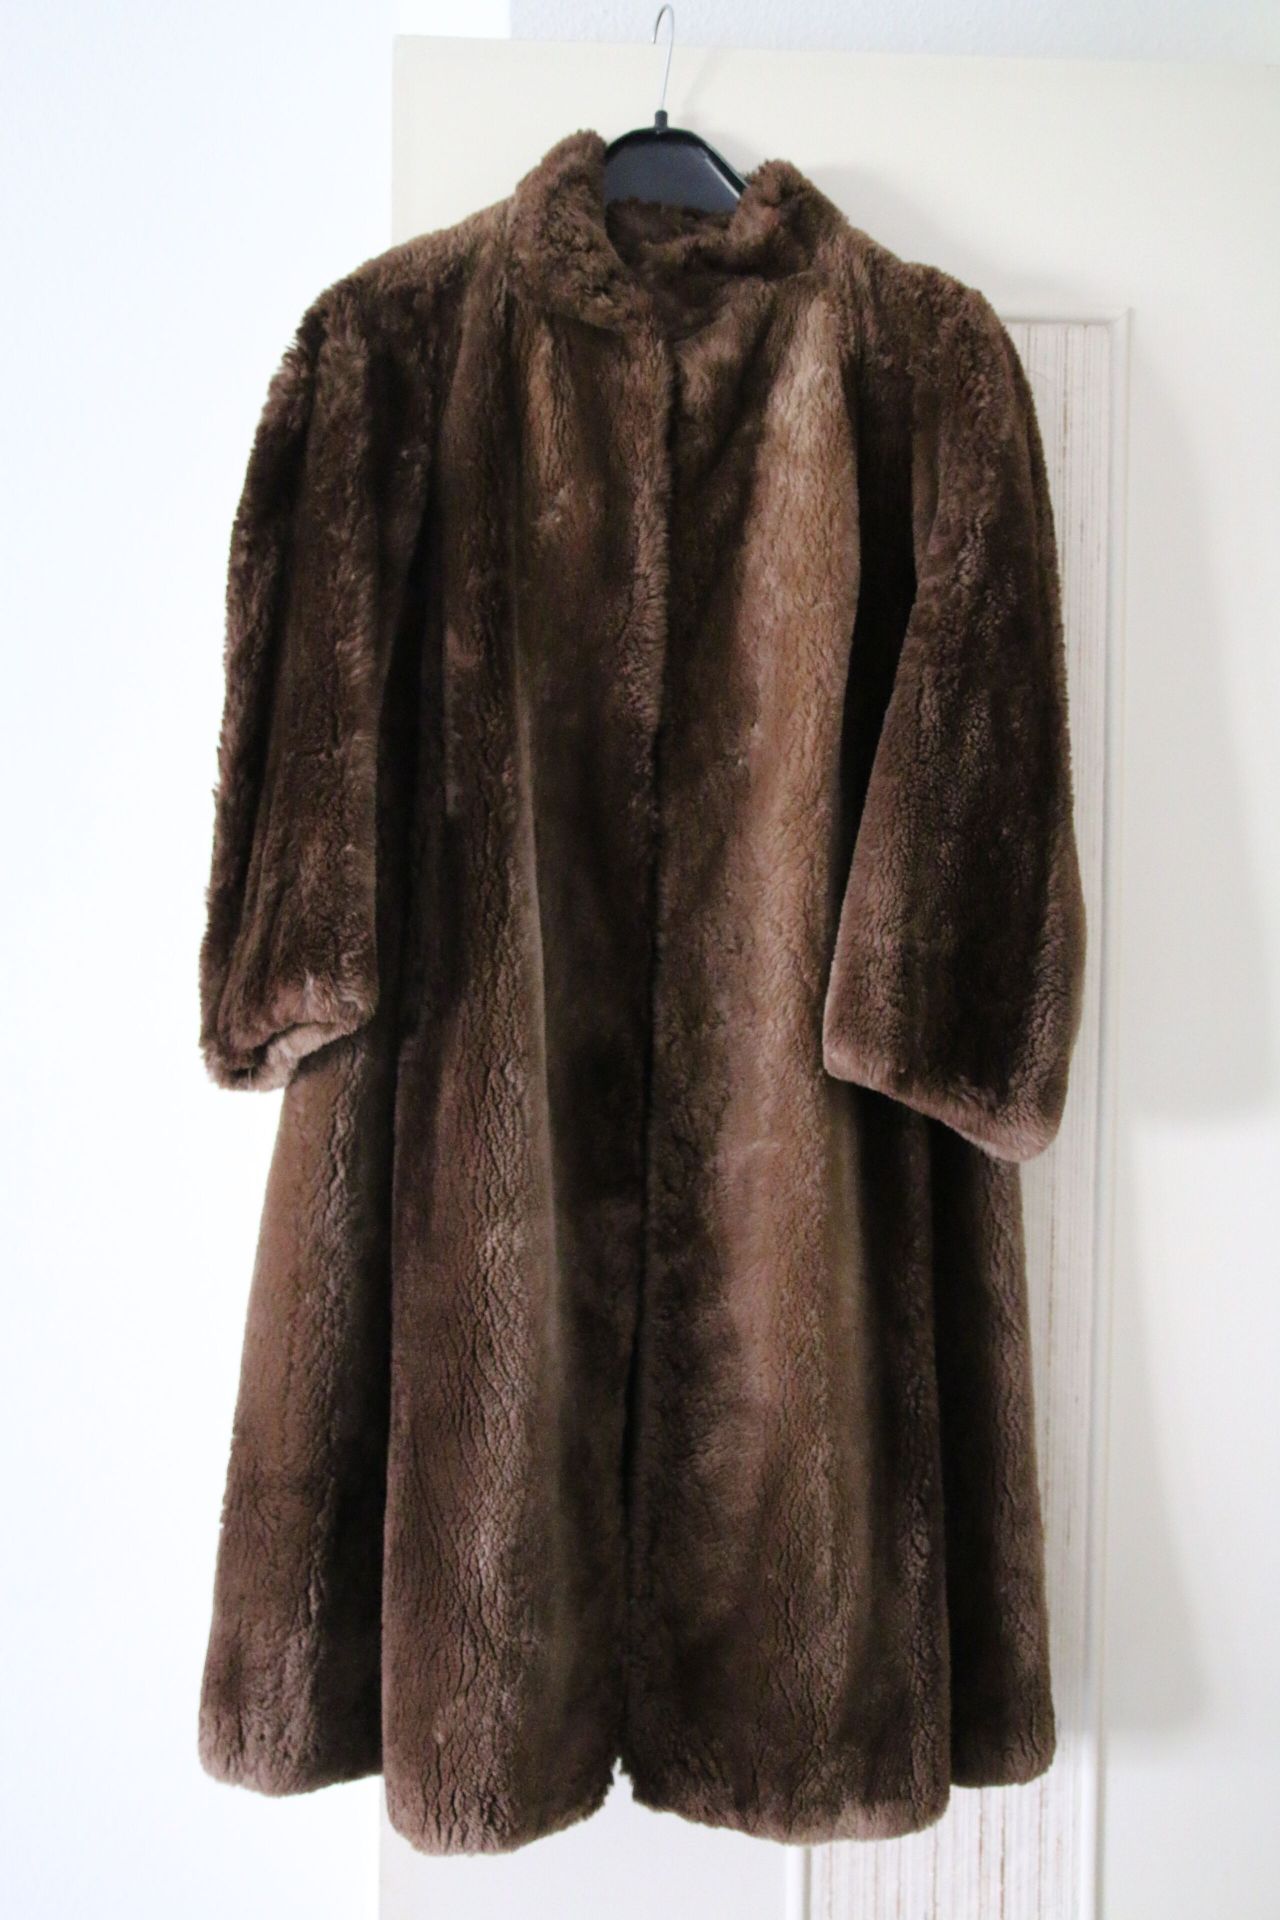 Null Brown fur coat - wear from use